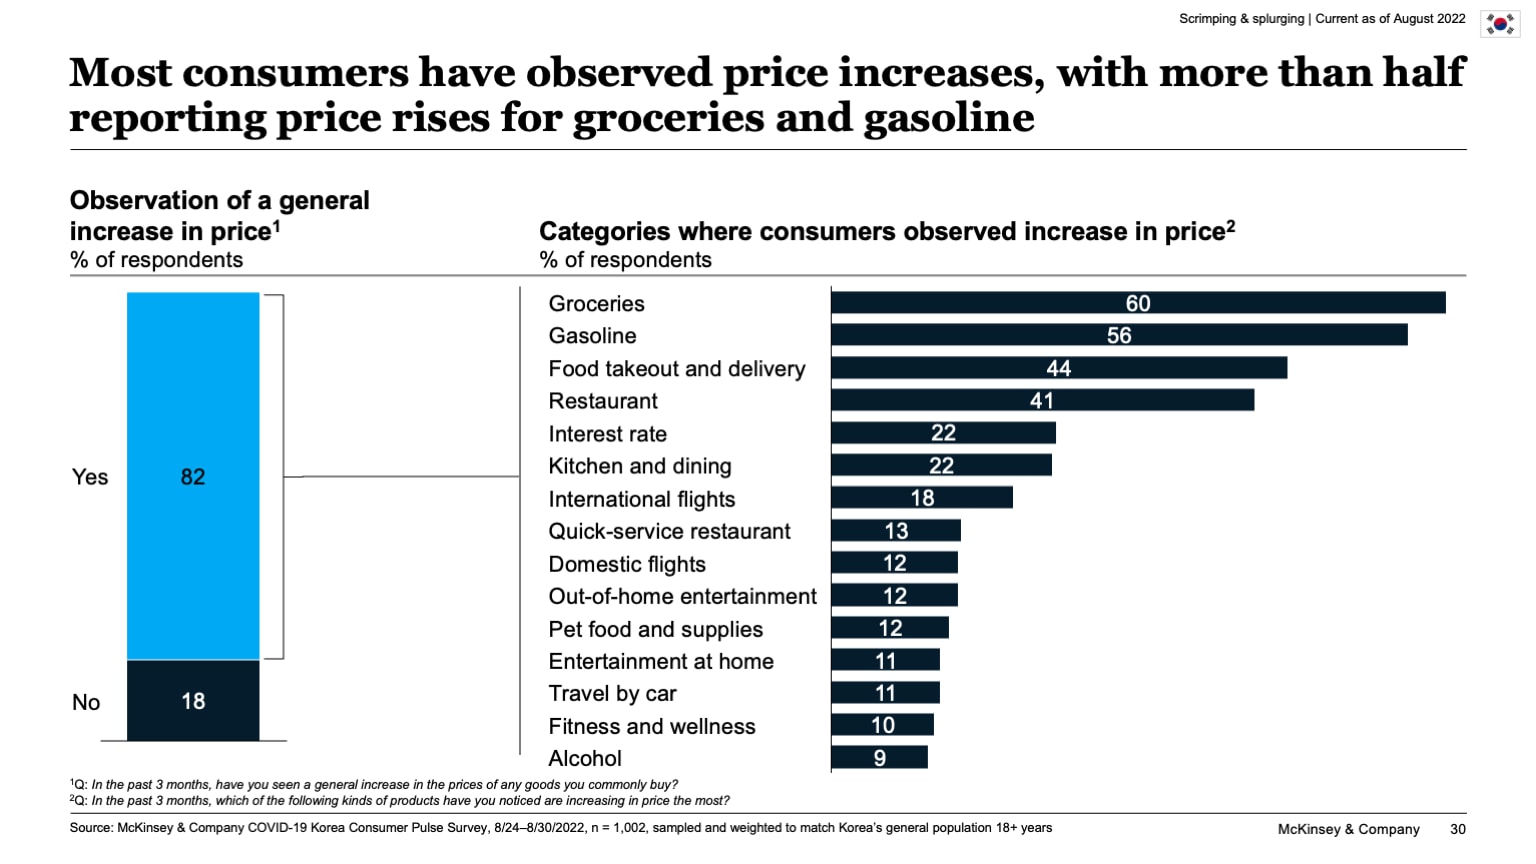 Most consumers have observed price increases, with more than half reporting price rises for groceries and gasoline